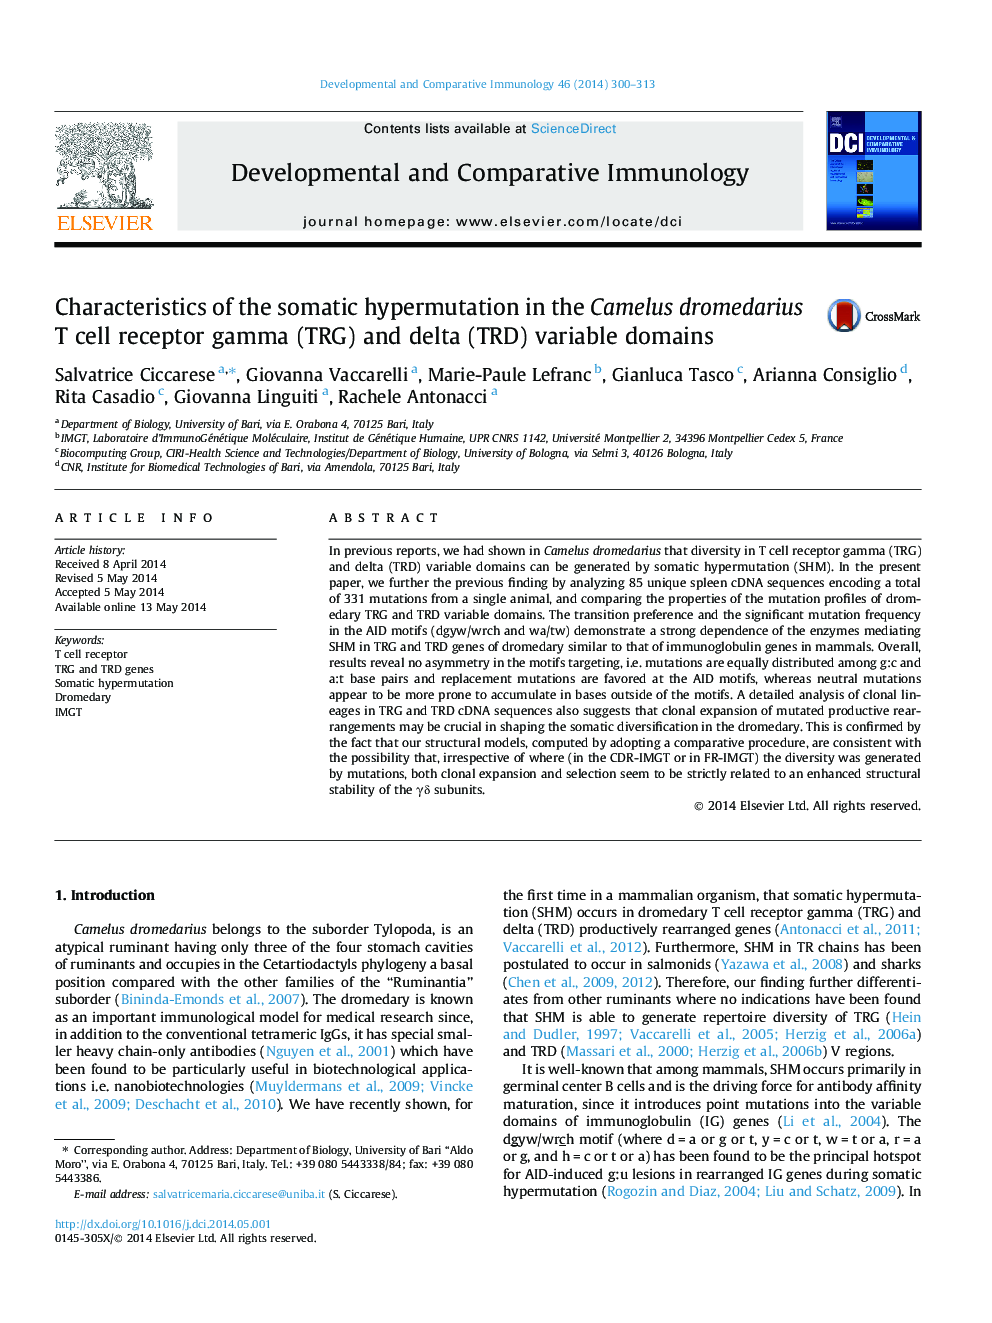 Characteristics of the somatic hypermutation in the Camelus dromedarius T cell receptor gamma (TRG) and delta (TRD) variable domains